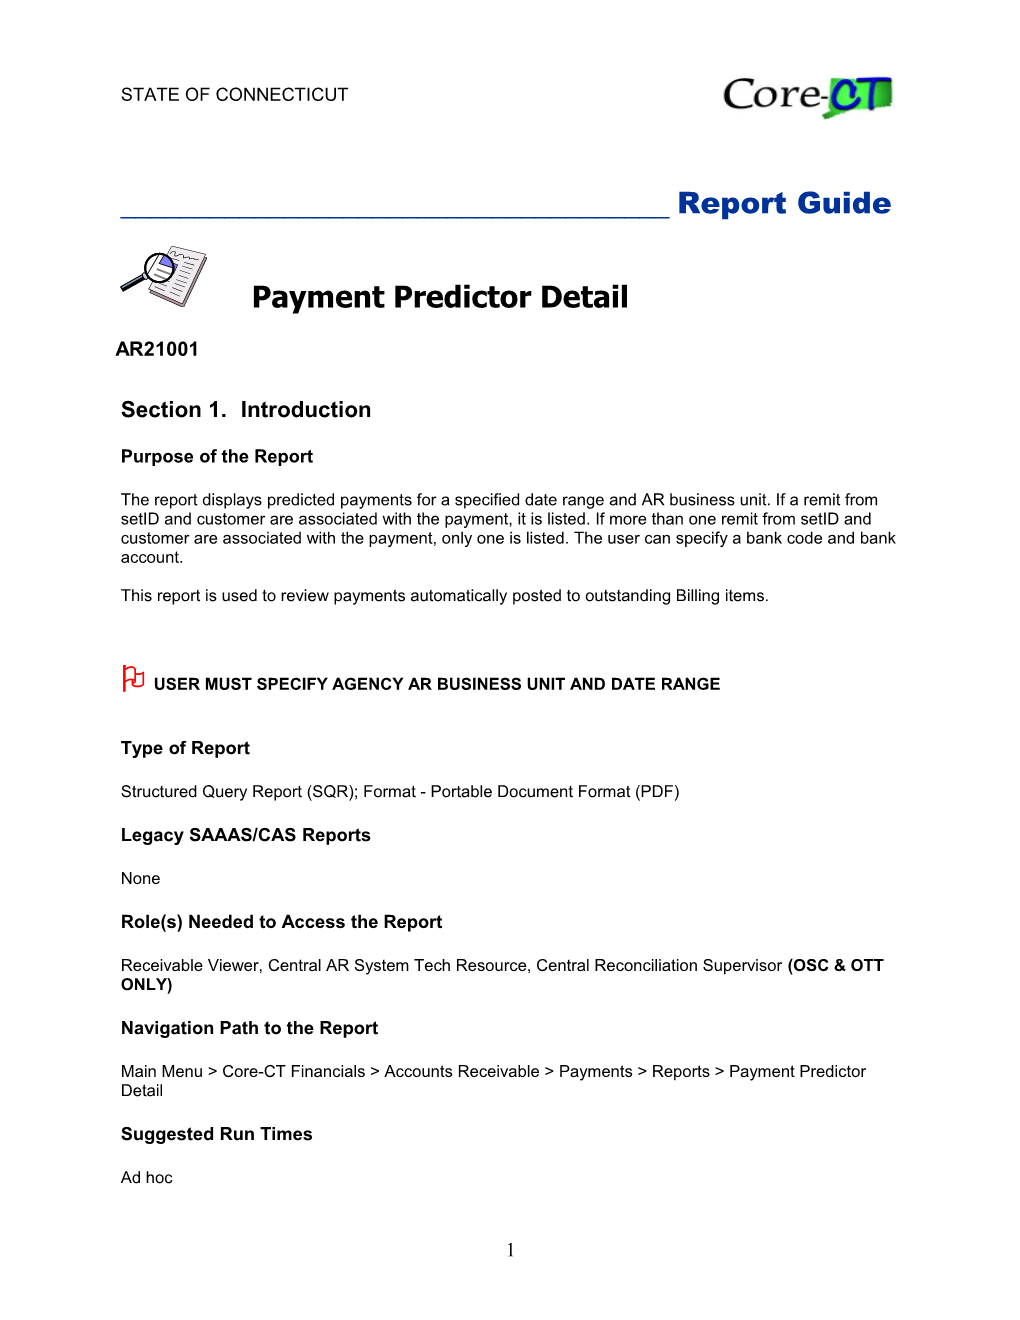 Payment Predictor Detail (AR21001)